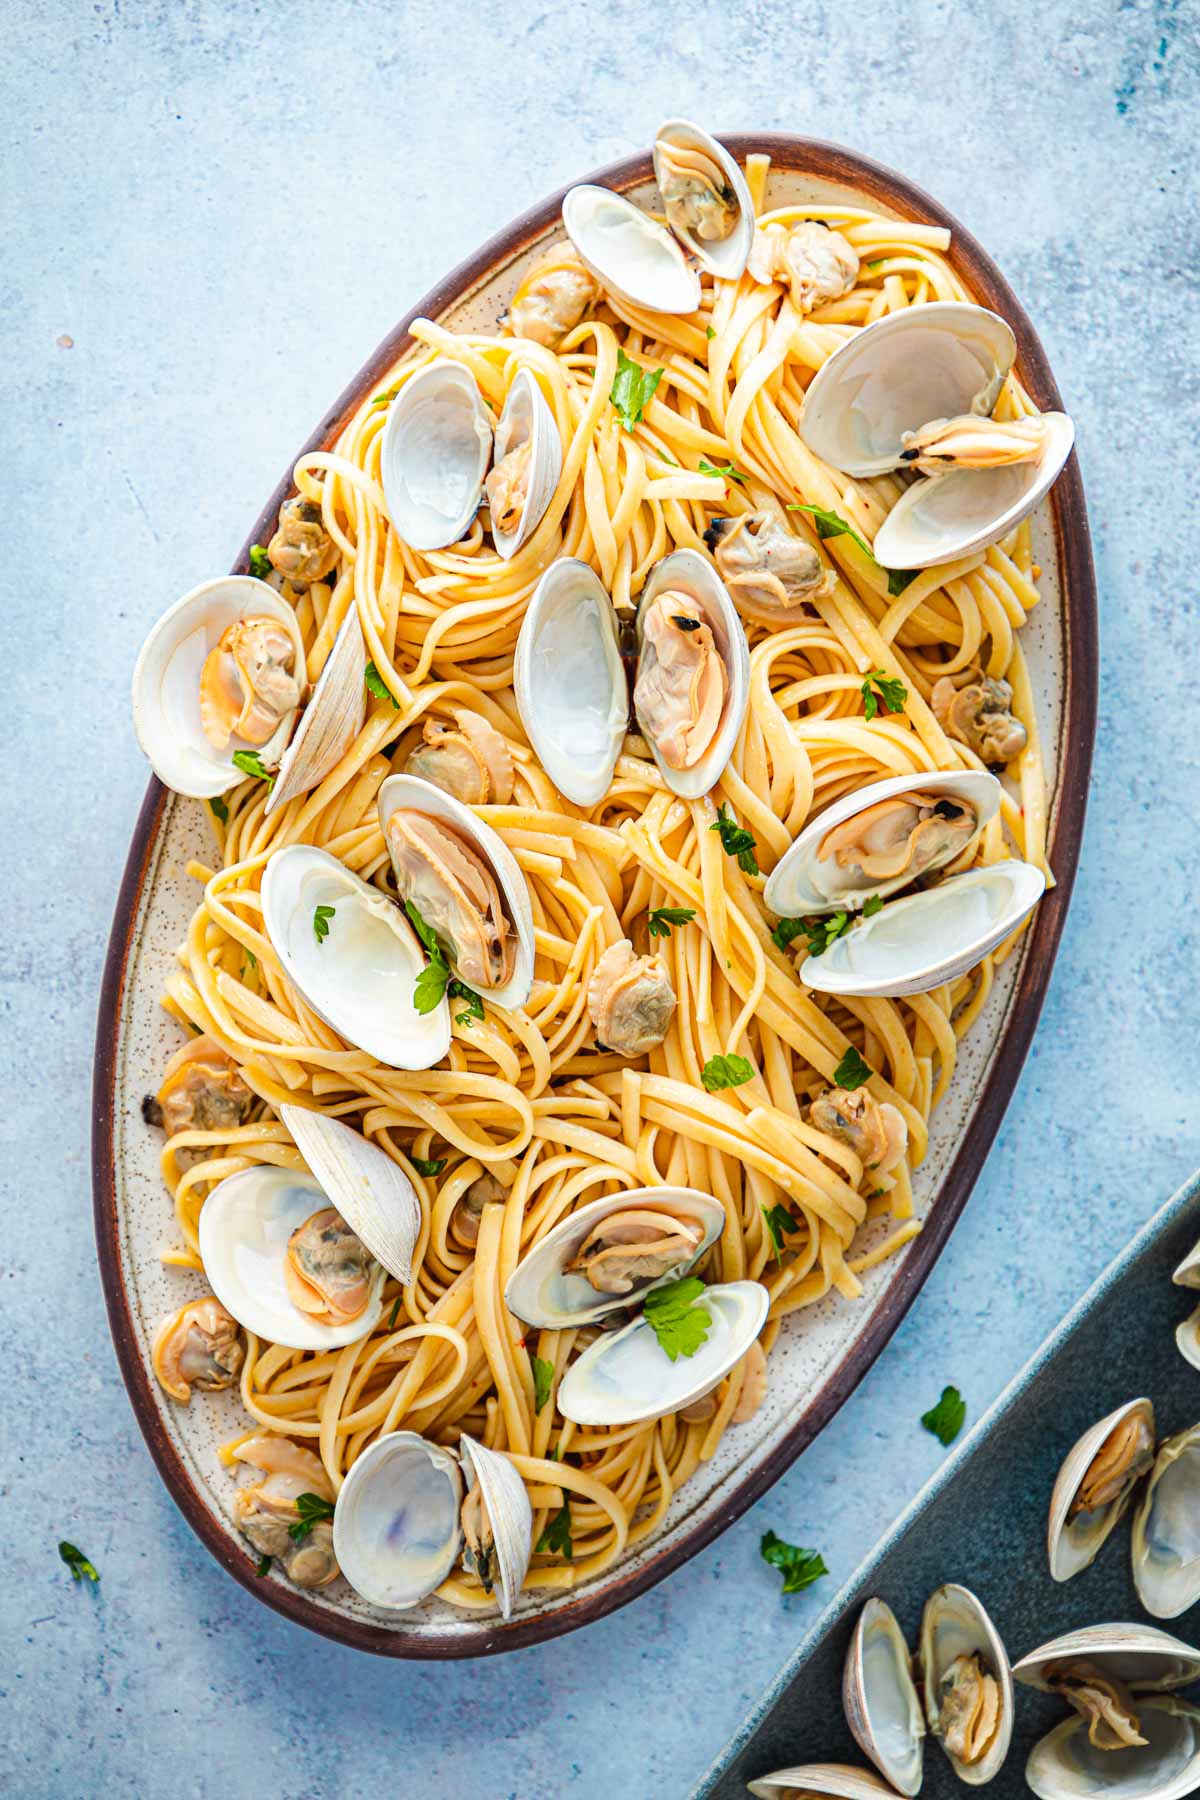 Large serving of linguini with clams in an oblong, shallow serving bowl with a brown rim.